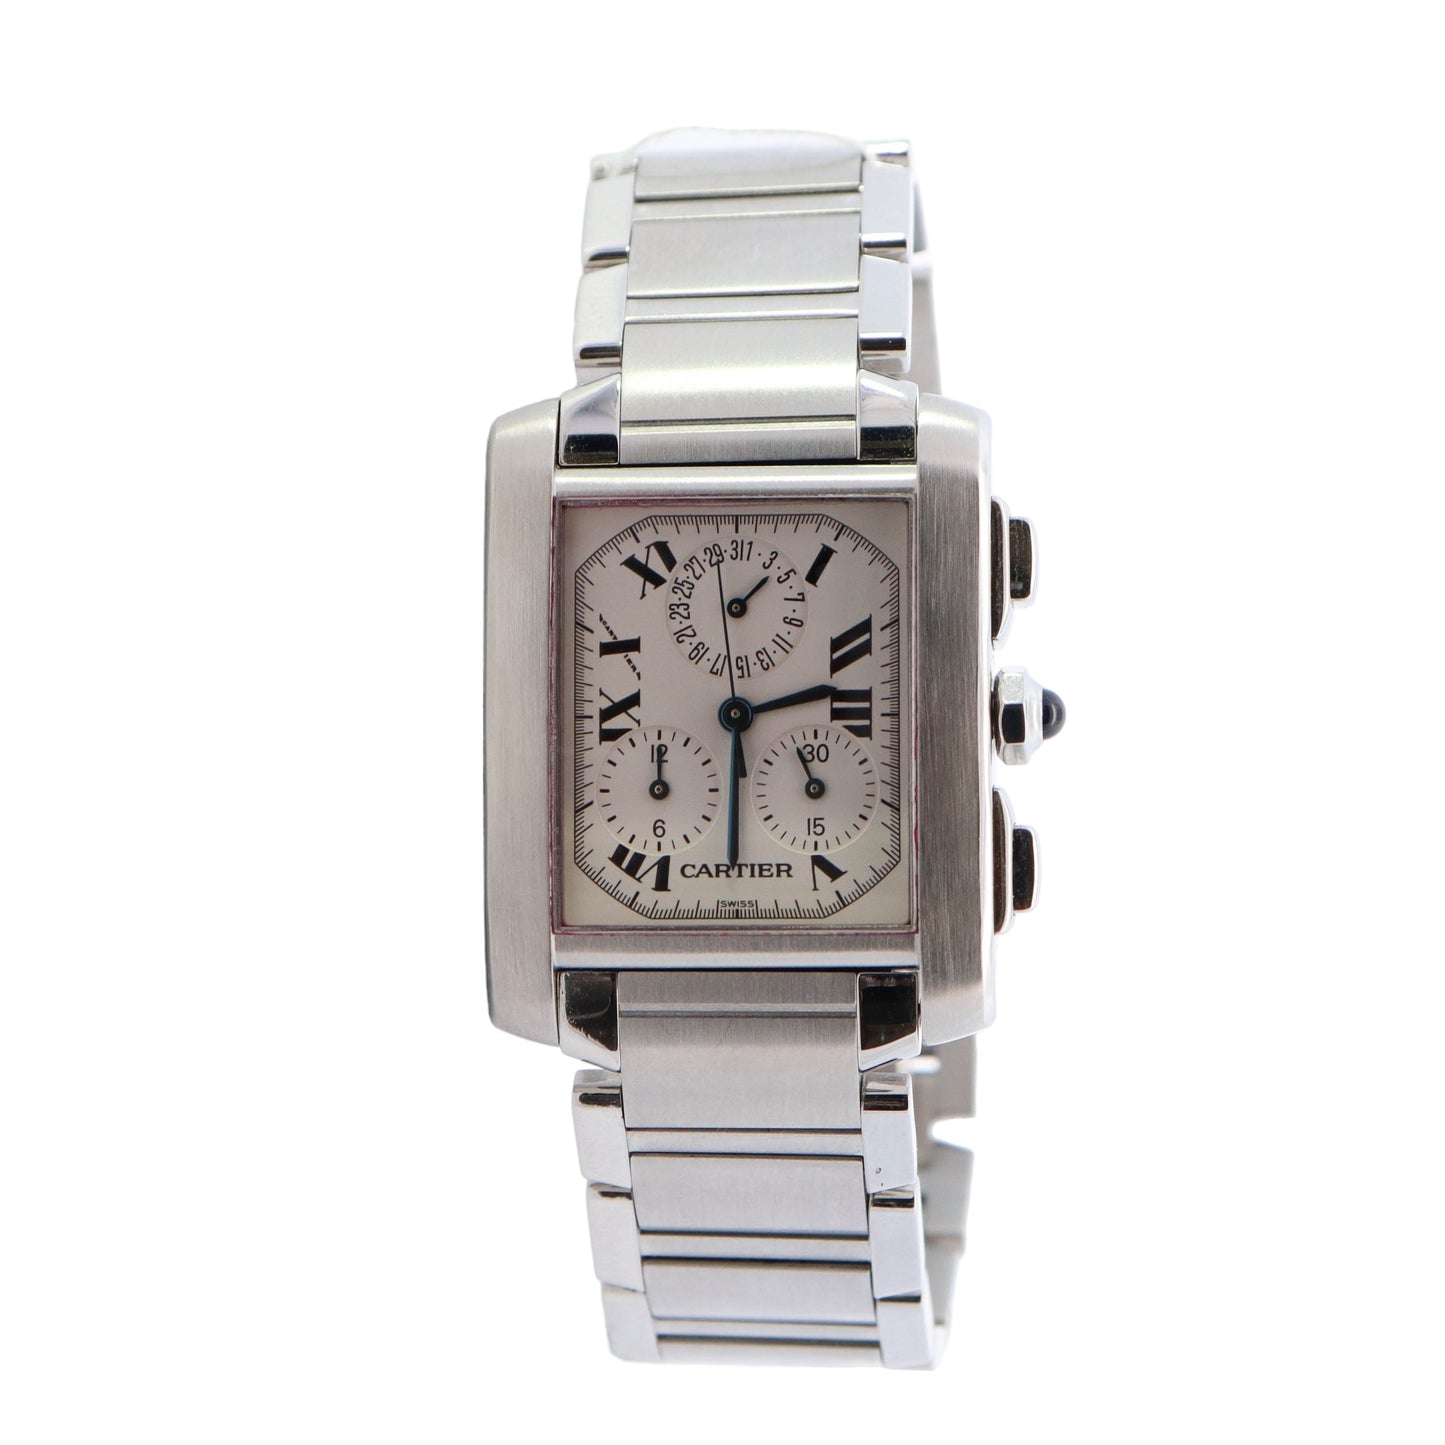 Cartier Tank Francaise Stainless Steel 28x37mm White Roman Dial Watch Reference #: W51001Q3 - Happy Jewelers Fine Jewelry Lifetime Warranty